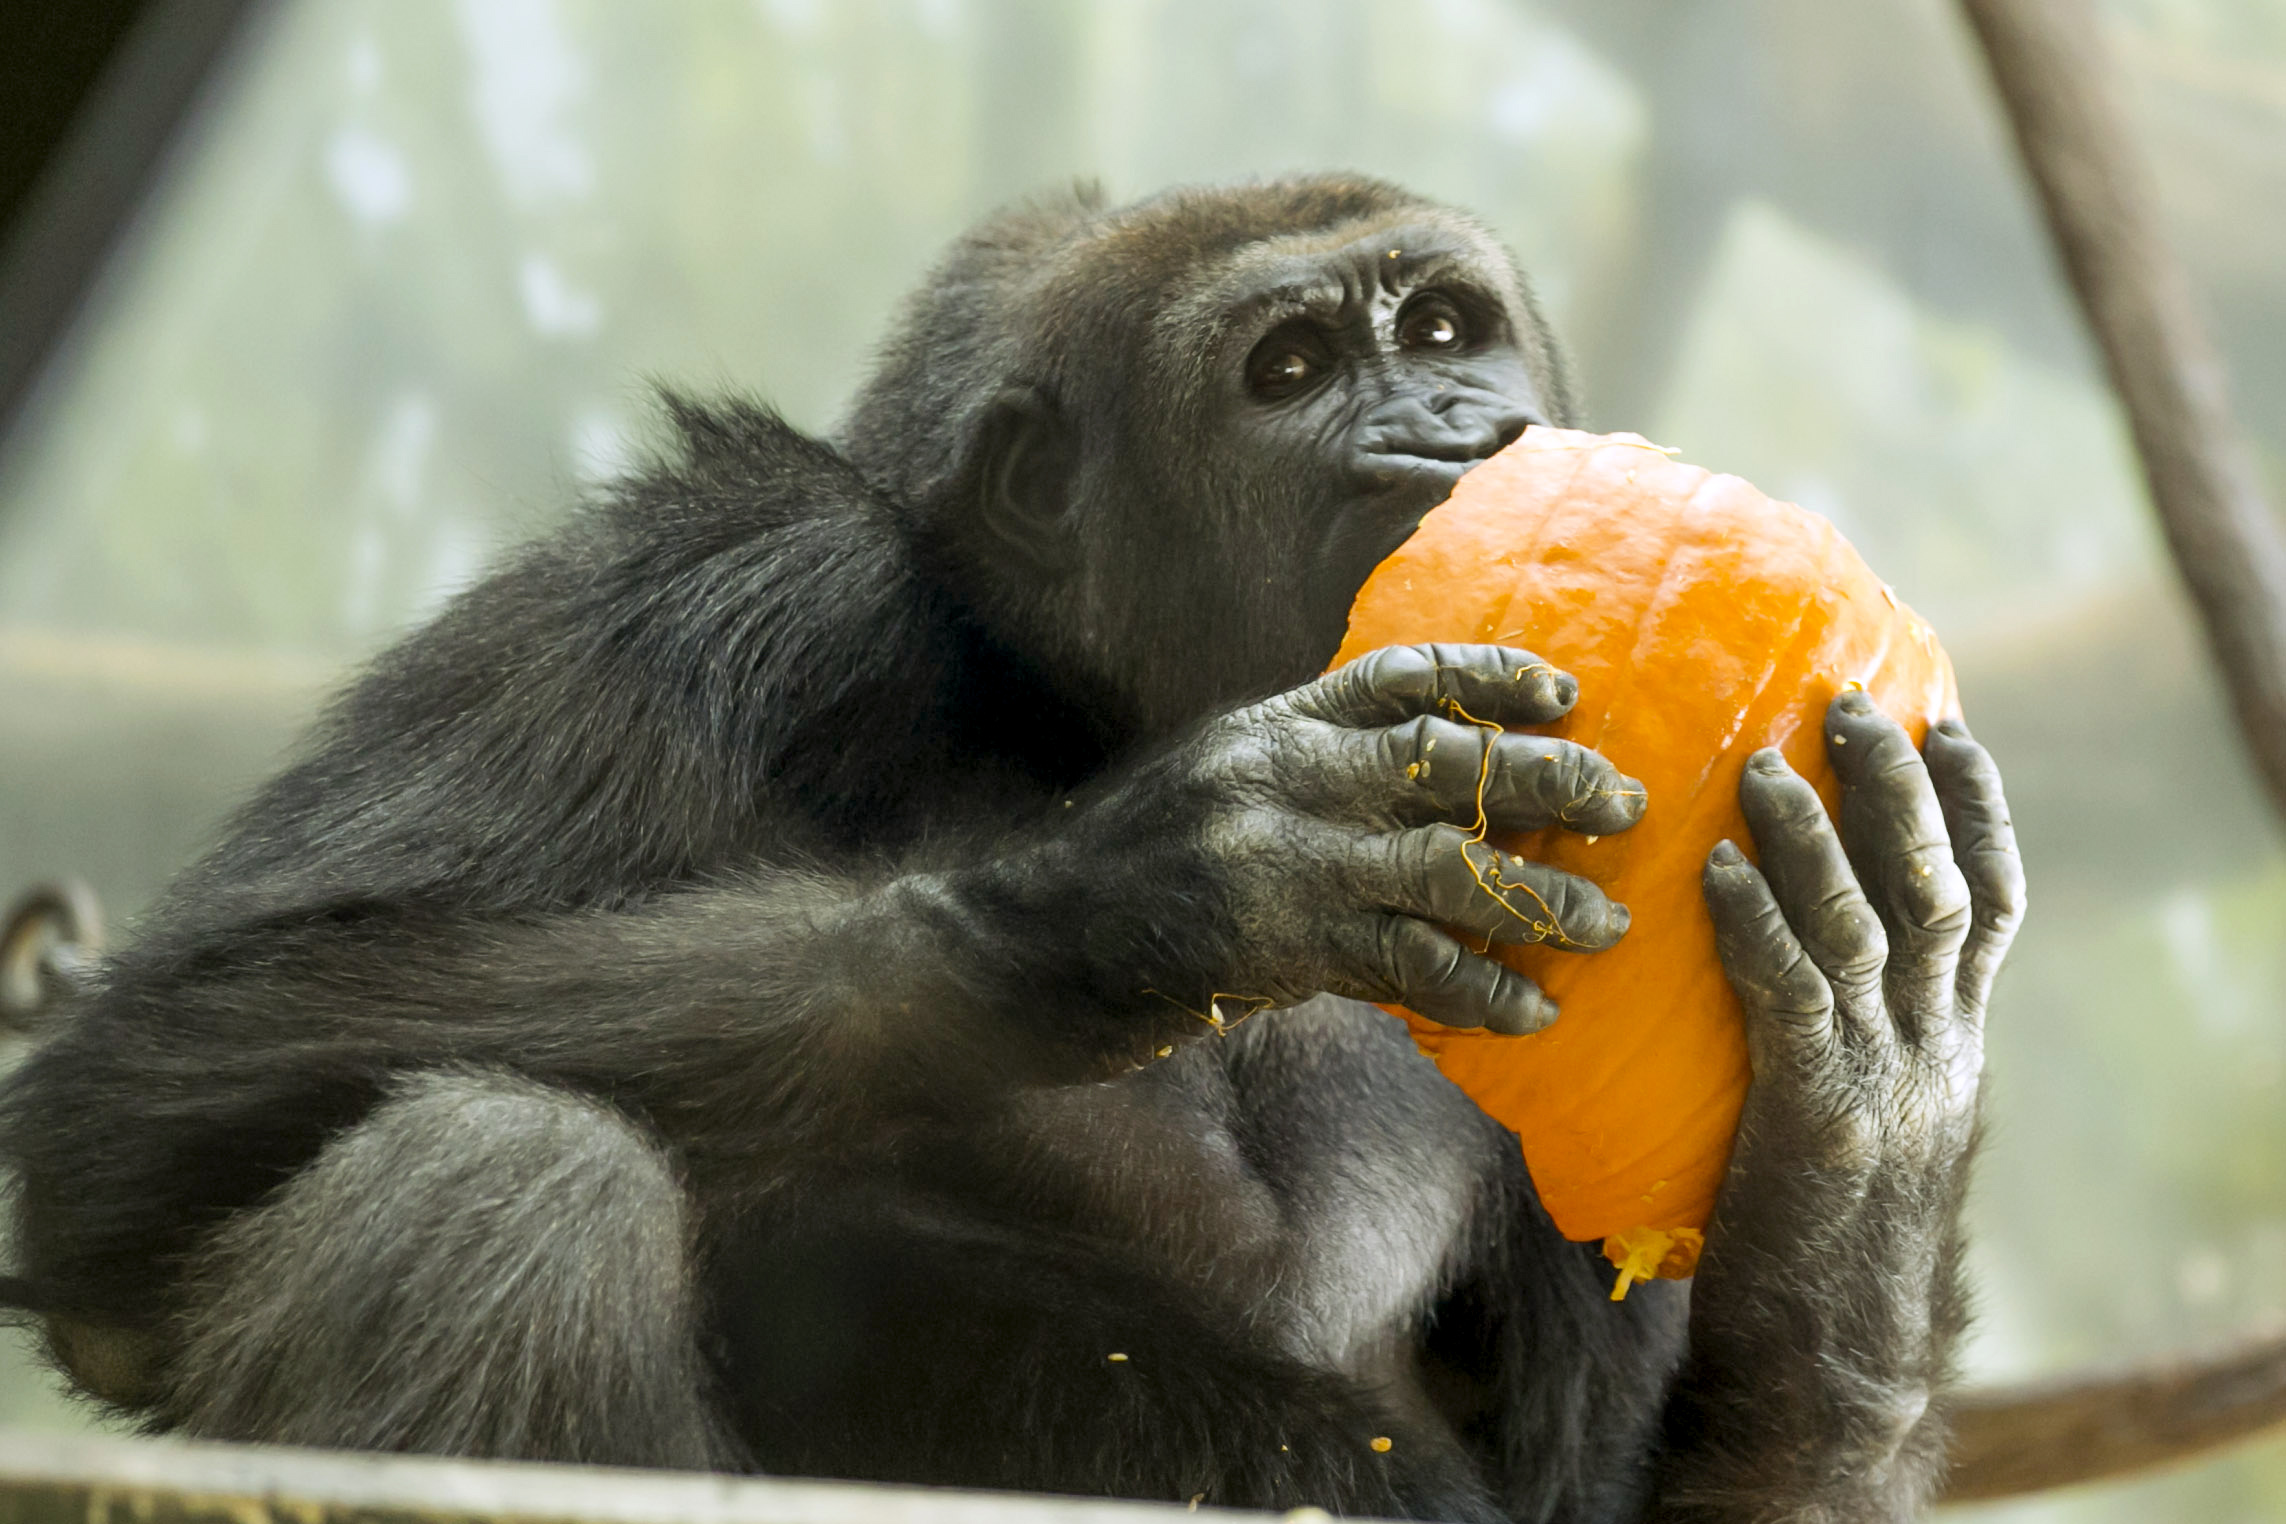 PHOTO: A western lowland gorilla bit into a pumpkin at the Lincoln Park Zoo in Chicago.